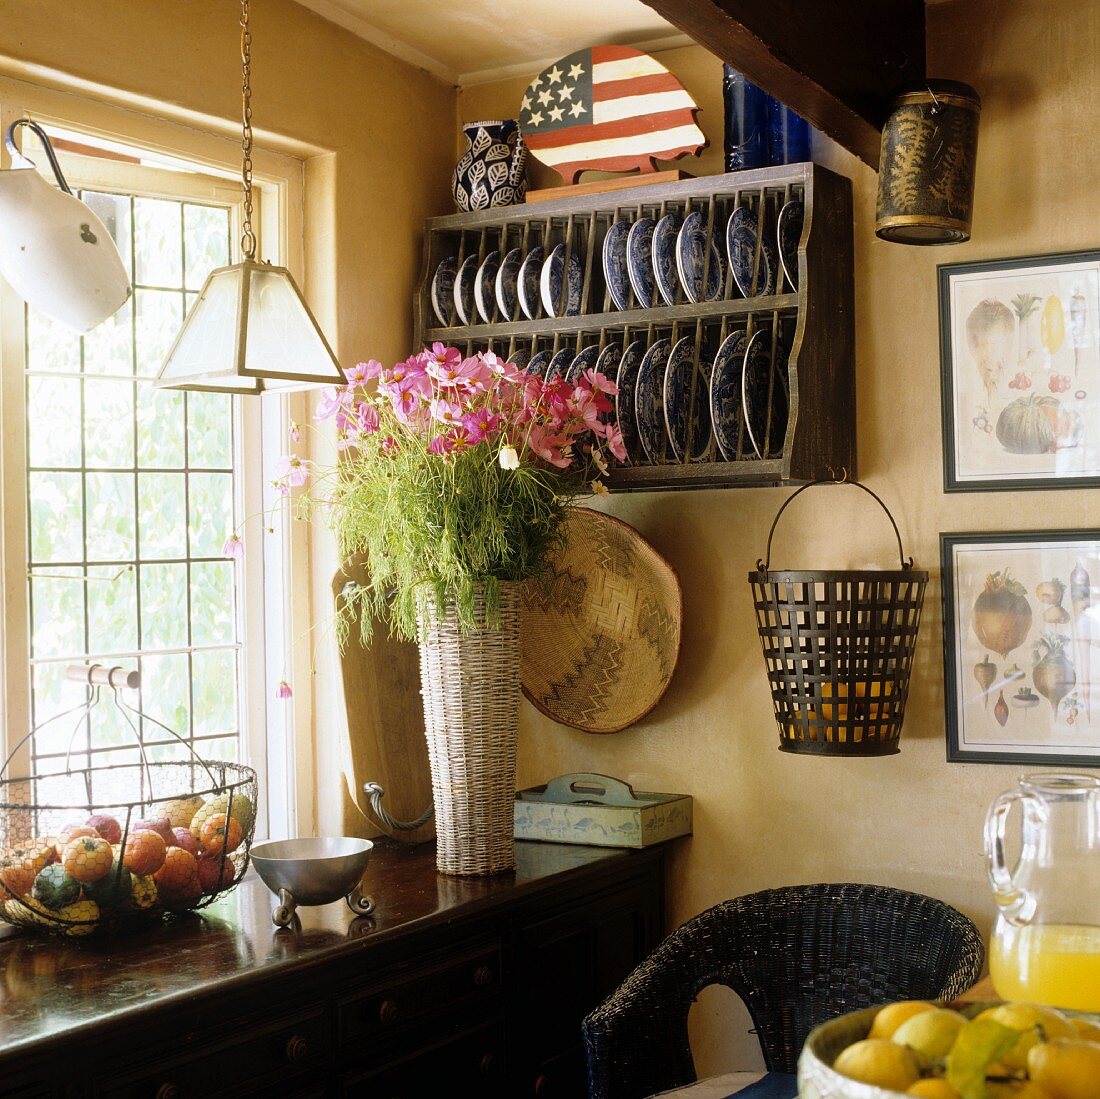 A corner of a kitchen with a plate rack and a bunch of flowers on a wooden shelf in front of the window